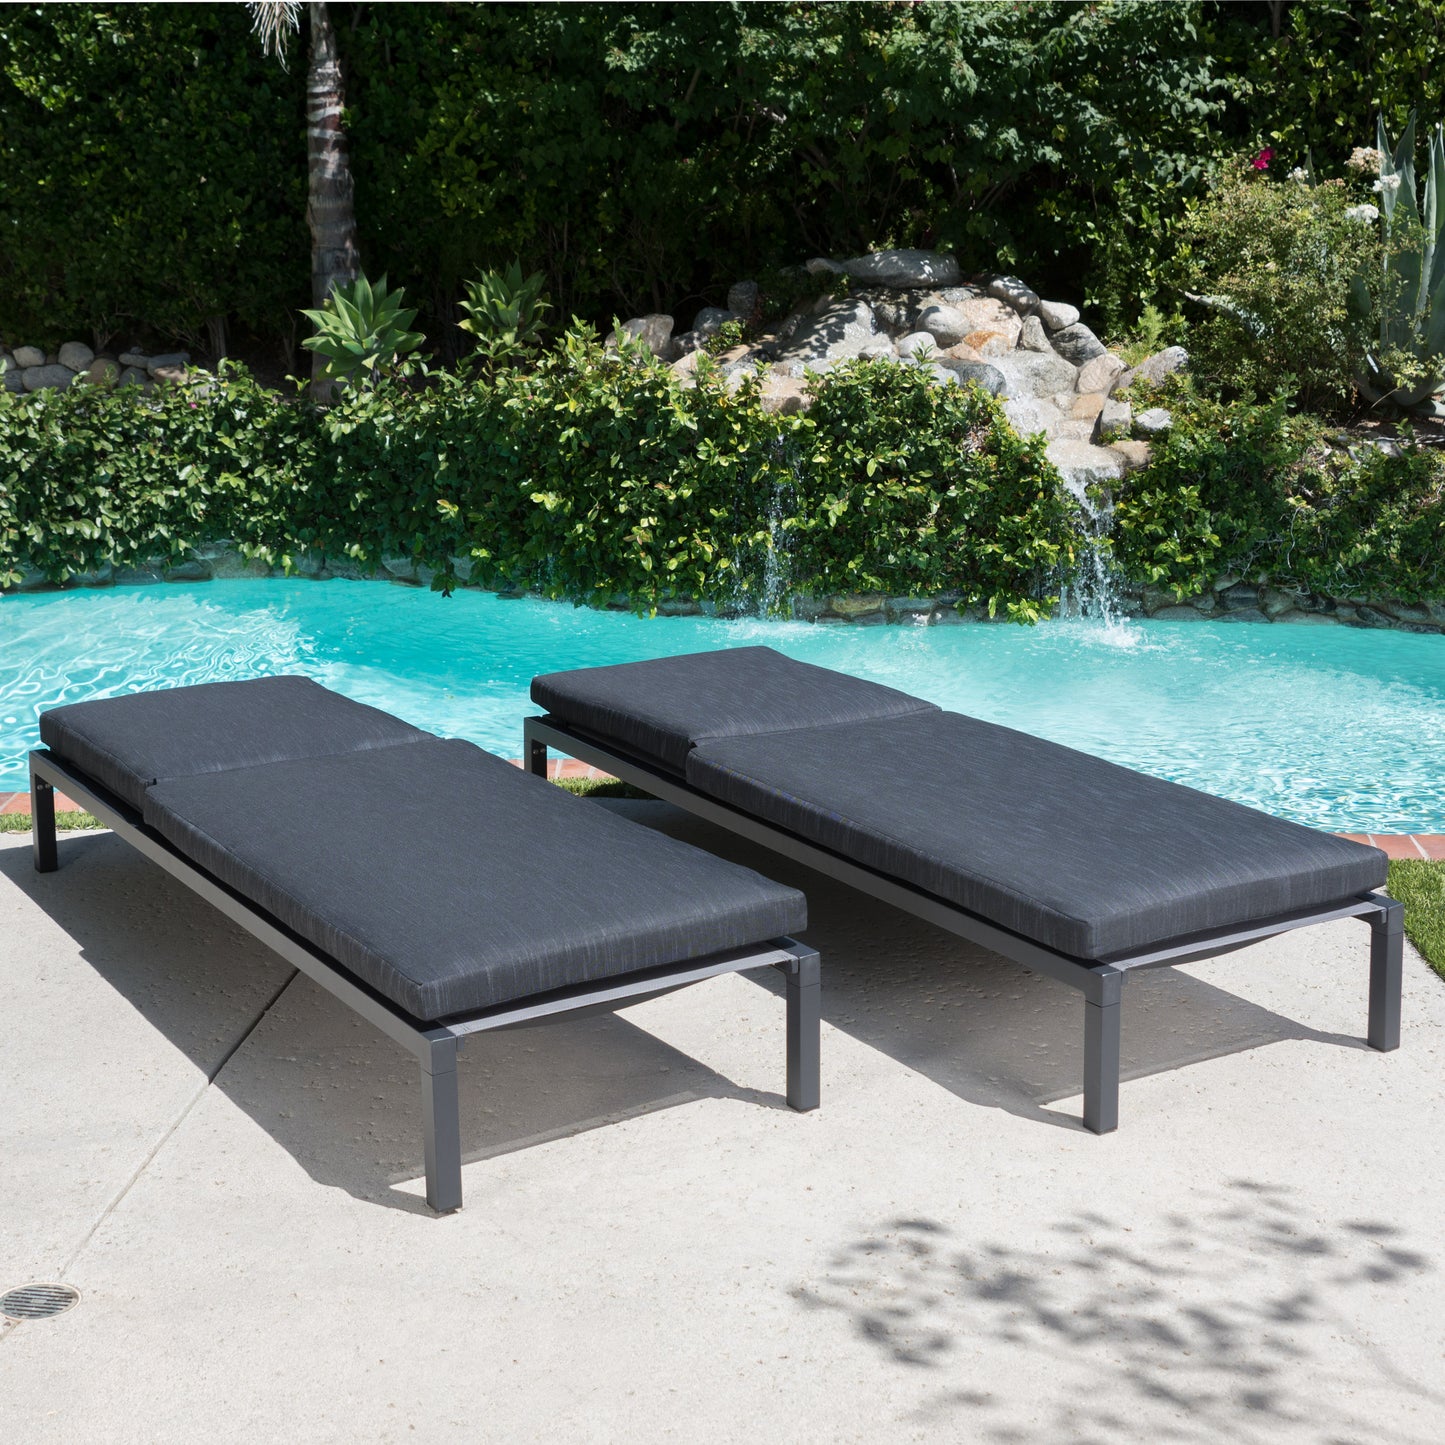 Nealie Outdoor Mesh Aluminum Frame Chaise Lounge w/ Water Resistant Cushion